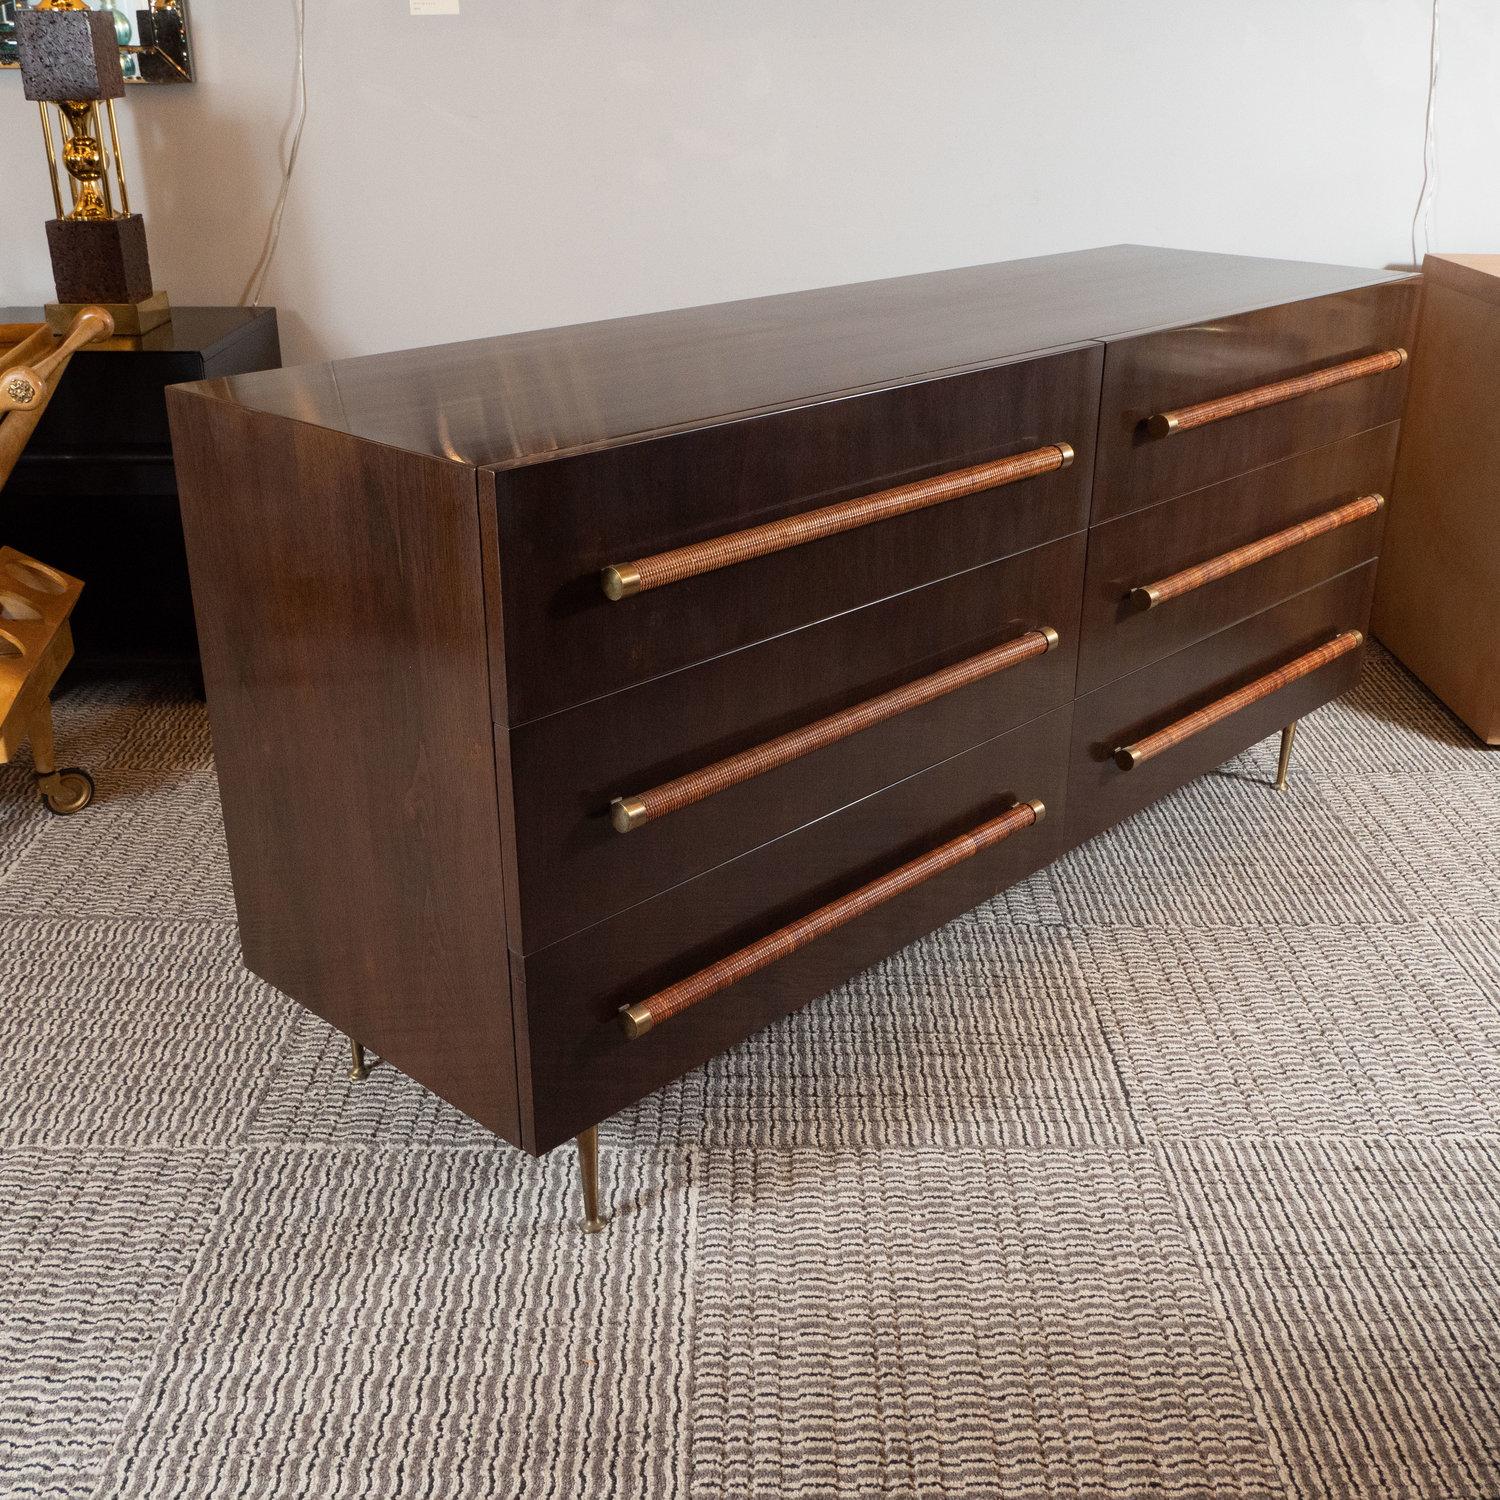 This refined and elegant Mid Century Modern dresser was designed by the celebrated T.H. Robsjohn Gibbings and handmade in Grand Rapids, Michigan circa 1950. Sitting on conical brass legs with circular bases, this stunning rectilinear sideboard was